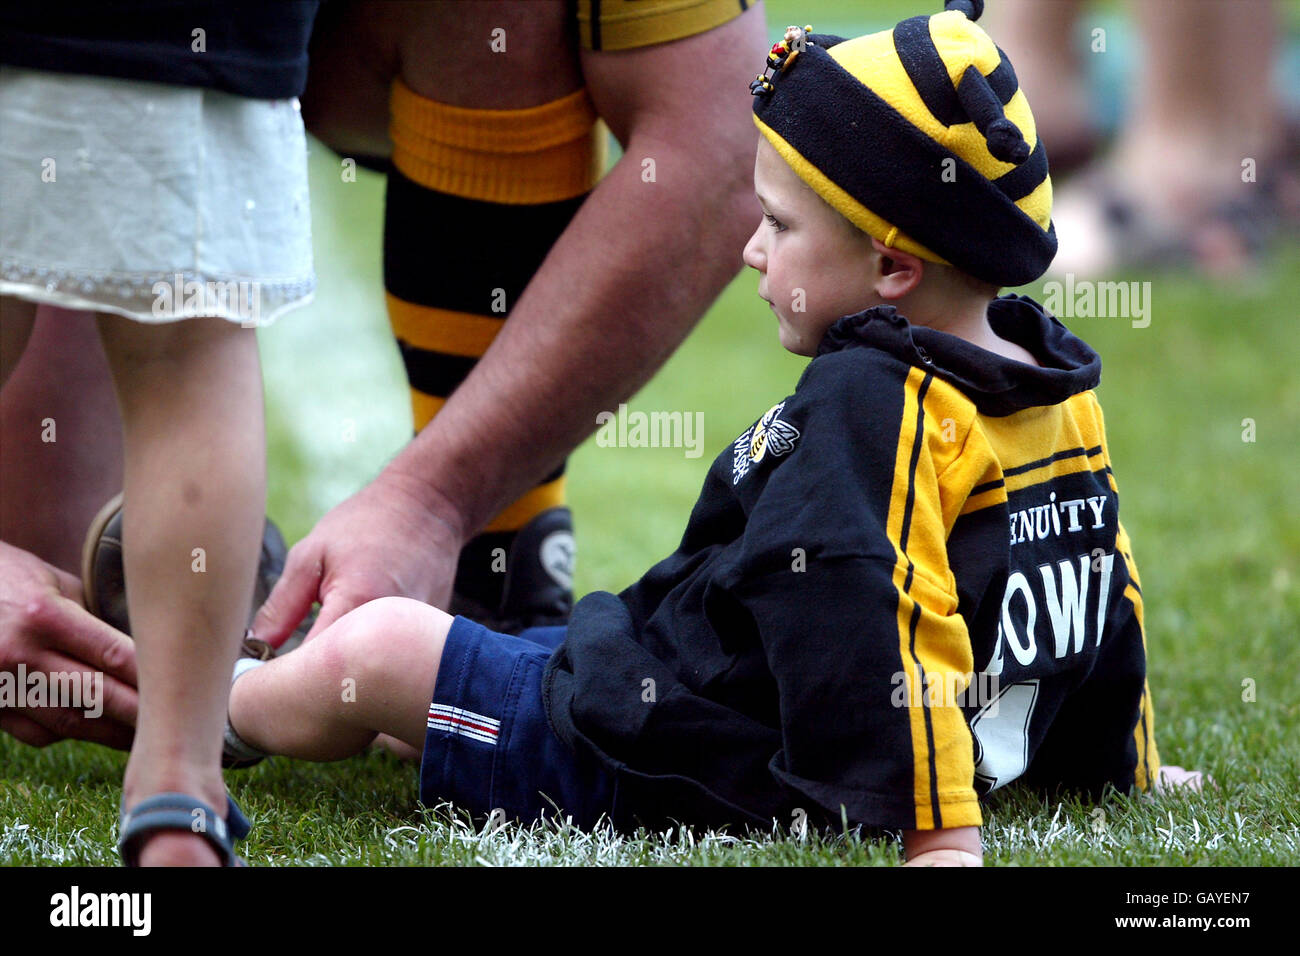 Rugby Union - Zurich Premiership - Final - Gloucester v London Wasps. The son of a London Wasps player gets his shoe laces tied up during the celebrations Stock Photo